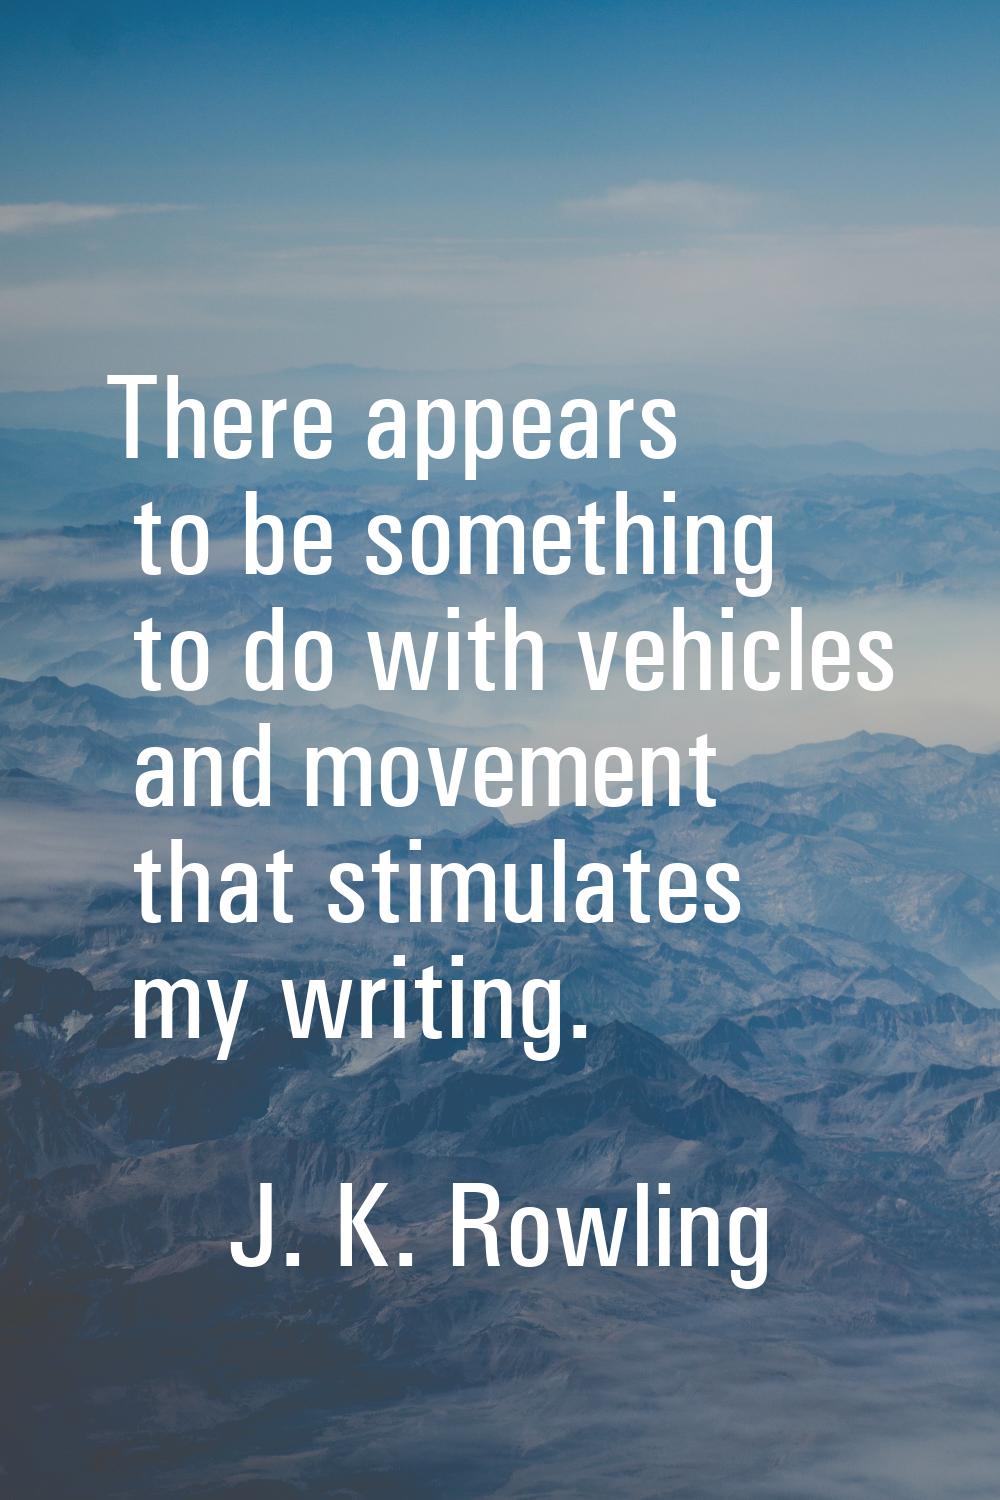 There appears to be something to do with vehicles and movement that stimulates my writing.